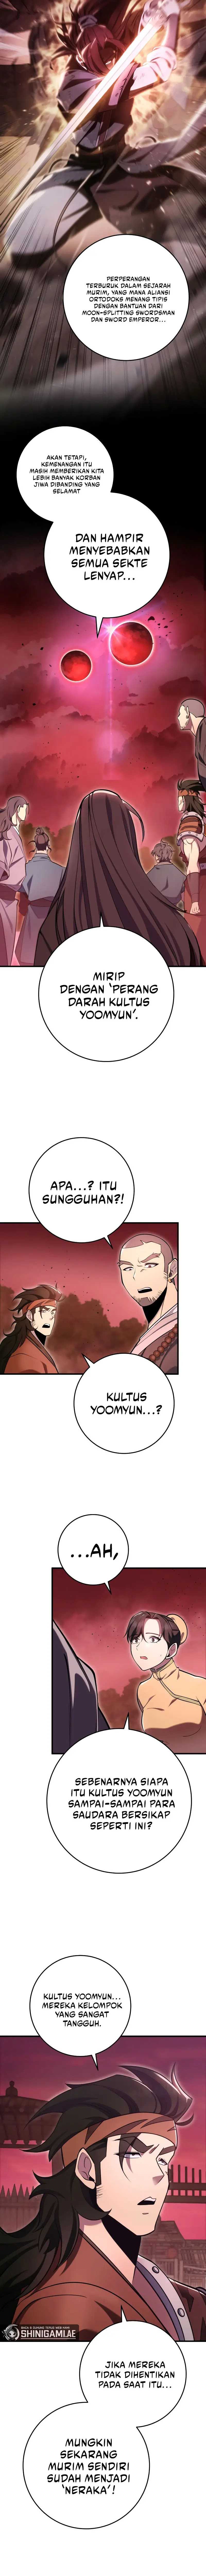 Heavenly Inquisition Sword Chapter 74